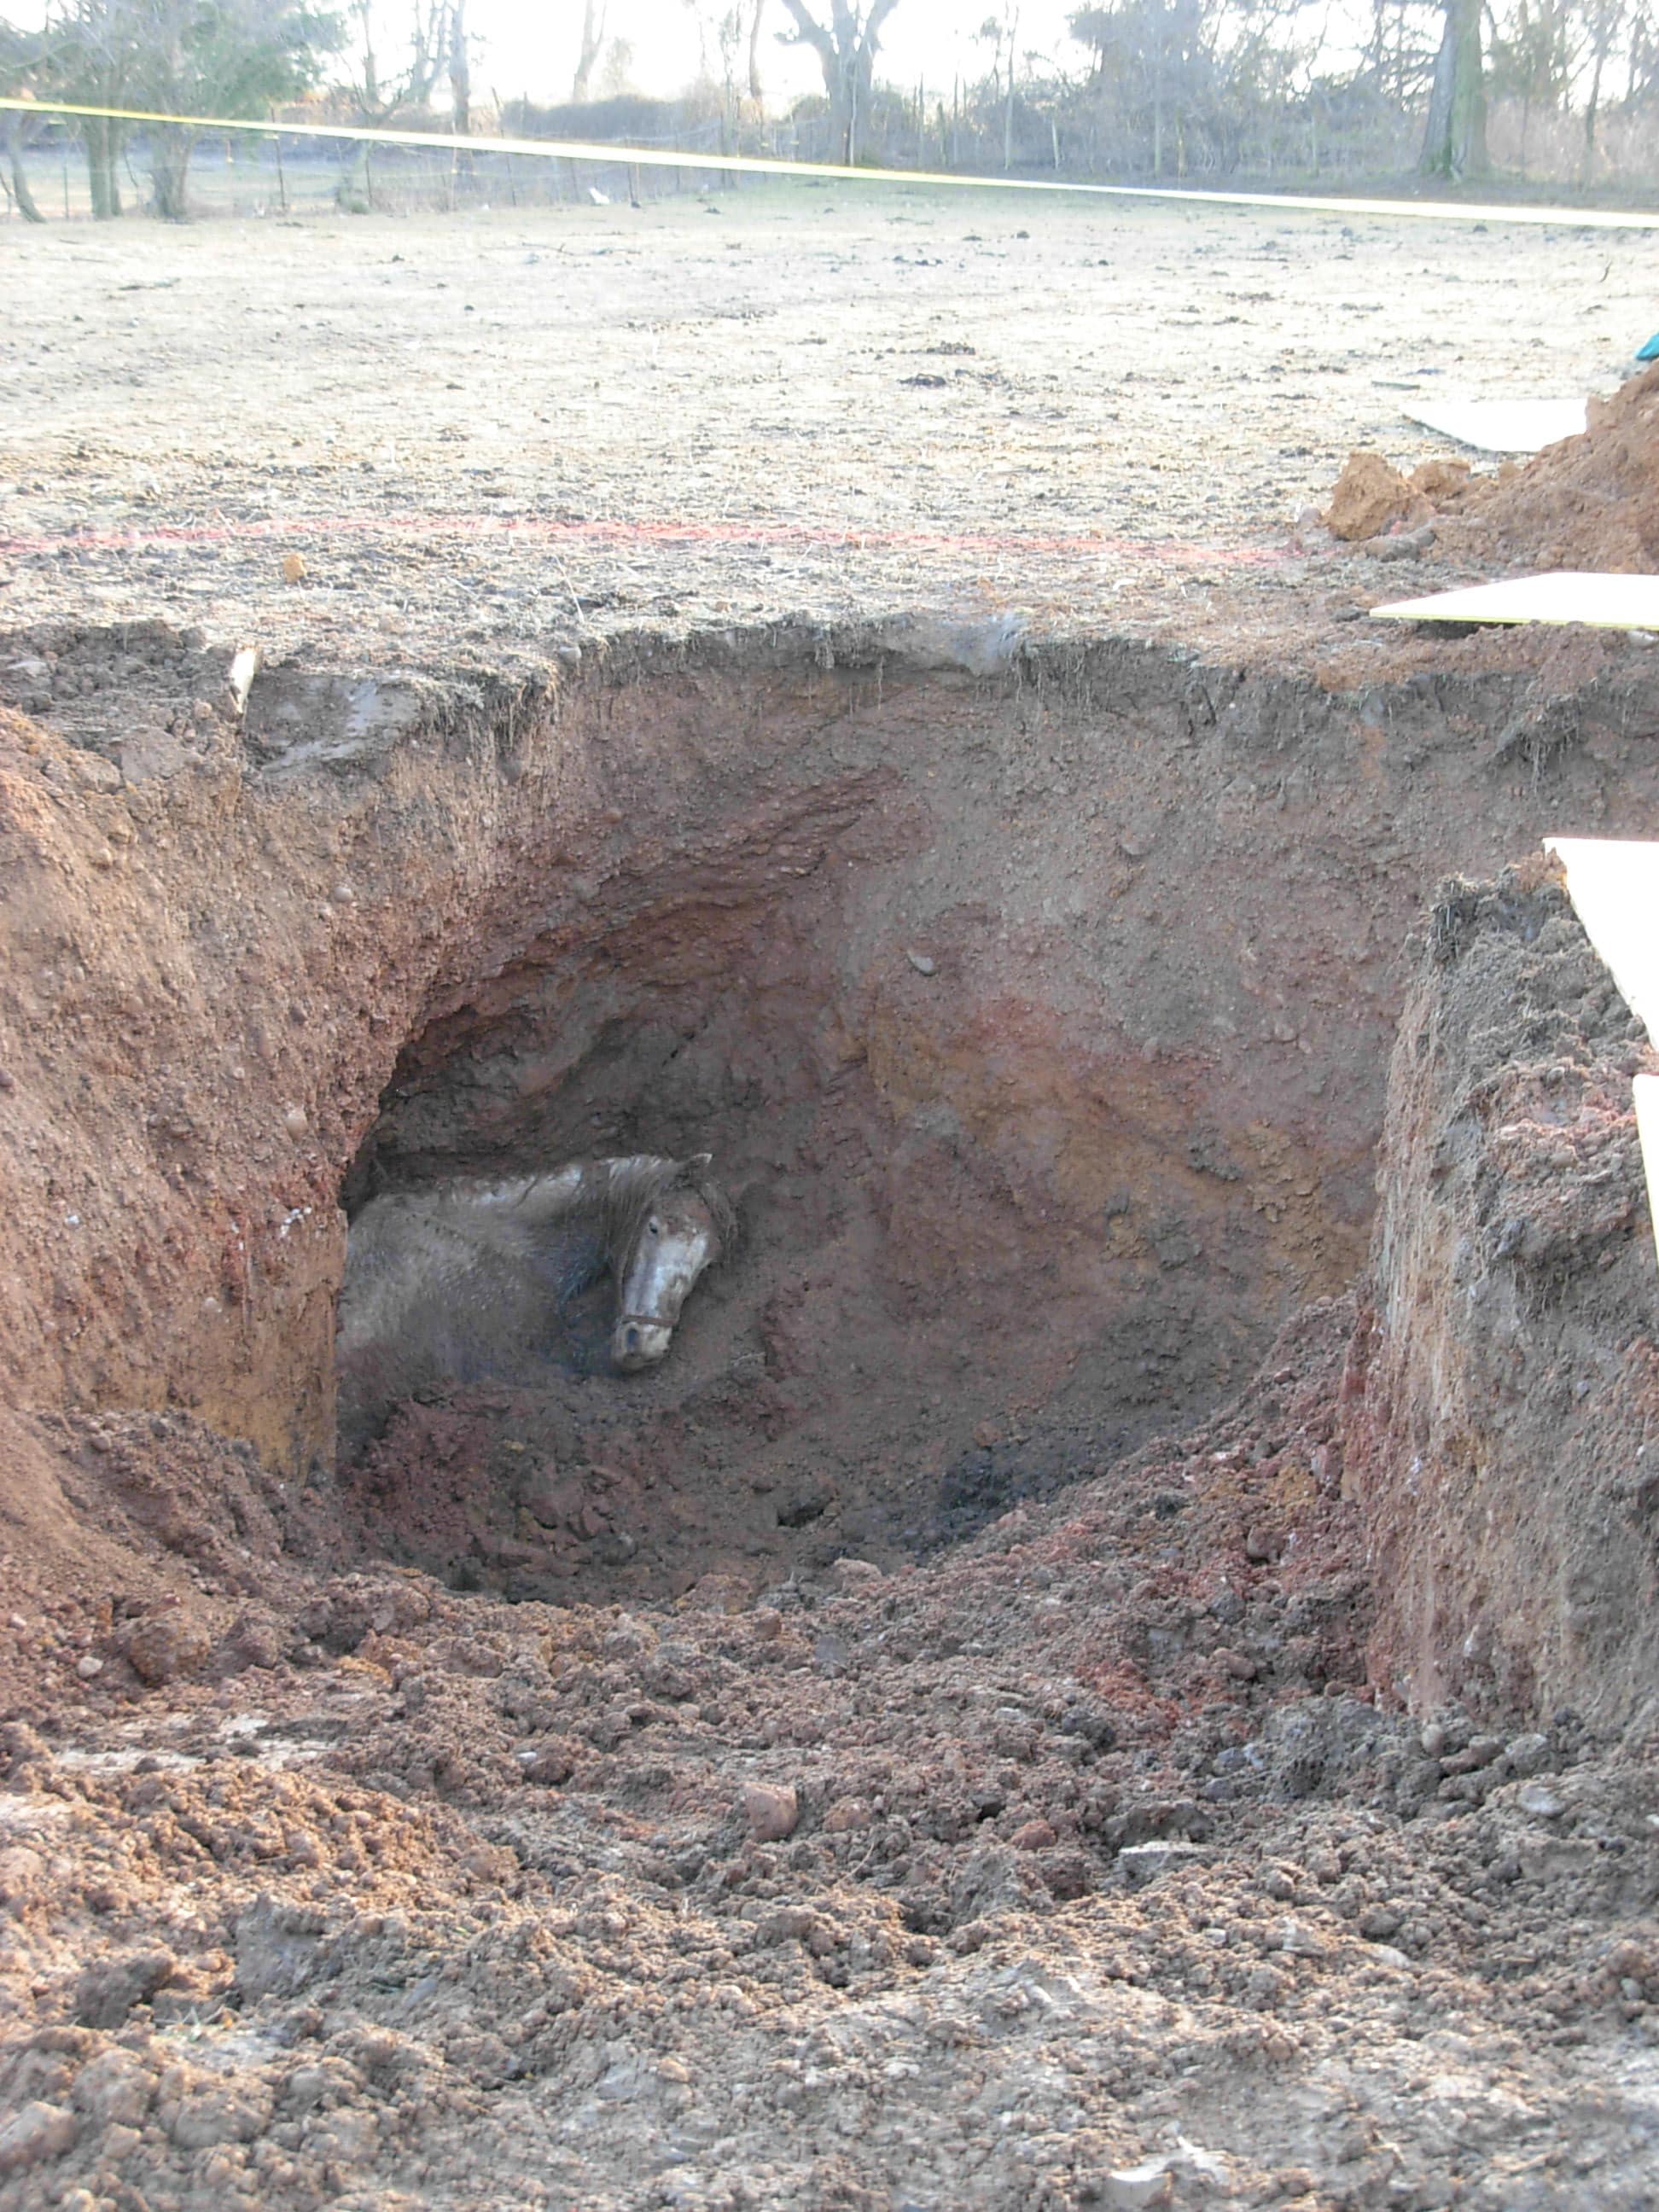 horse in sinkhole, horse rescue, save horse life